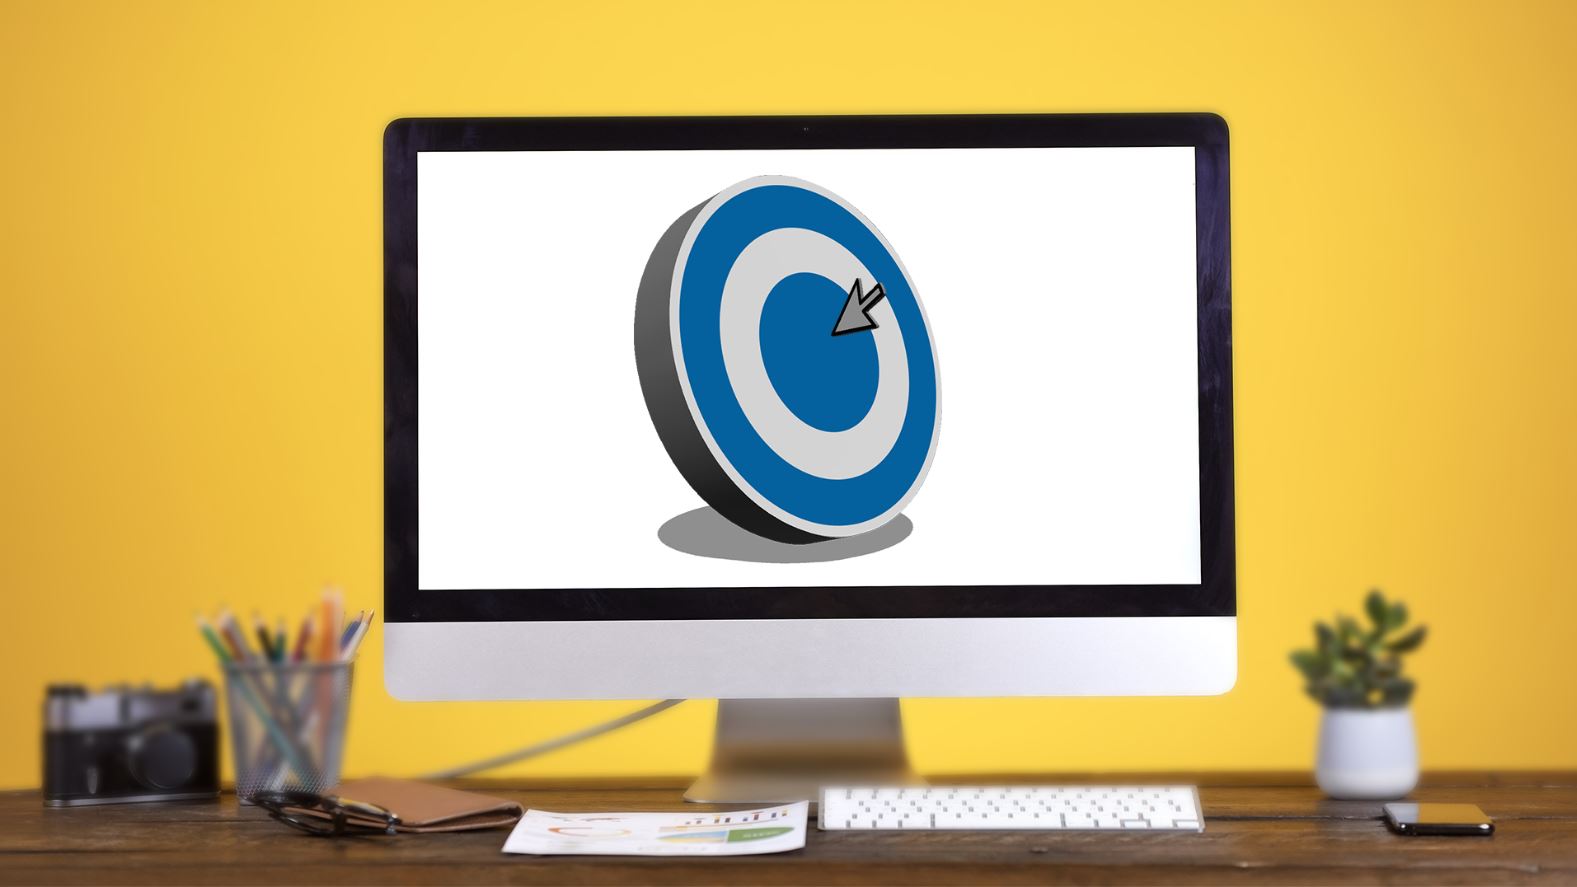 Retargeting 101: What’s it all about?